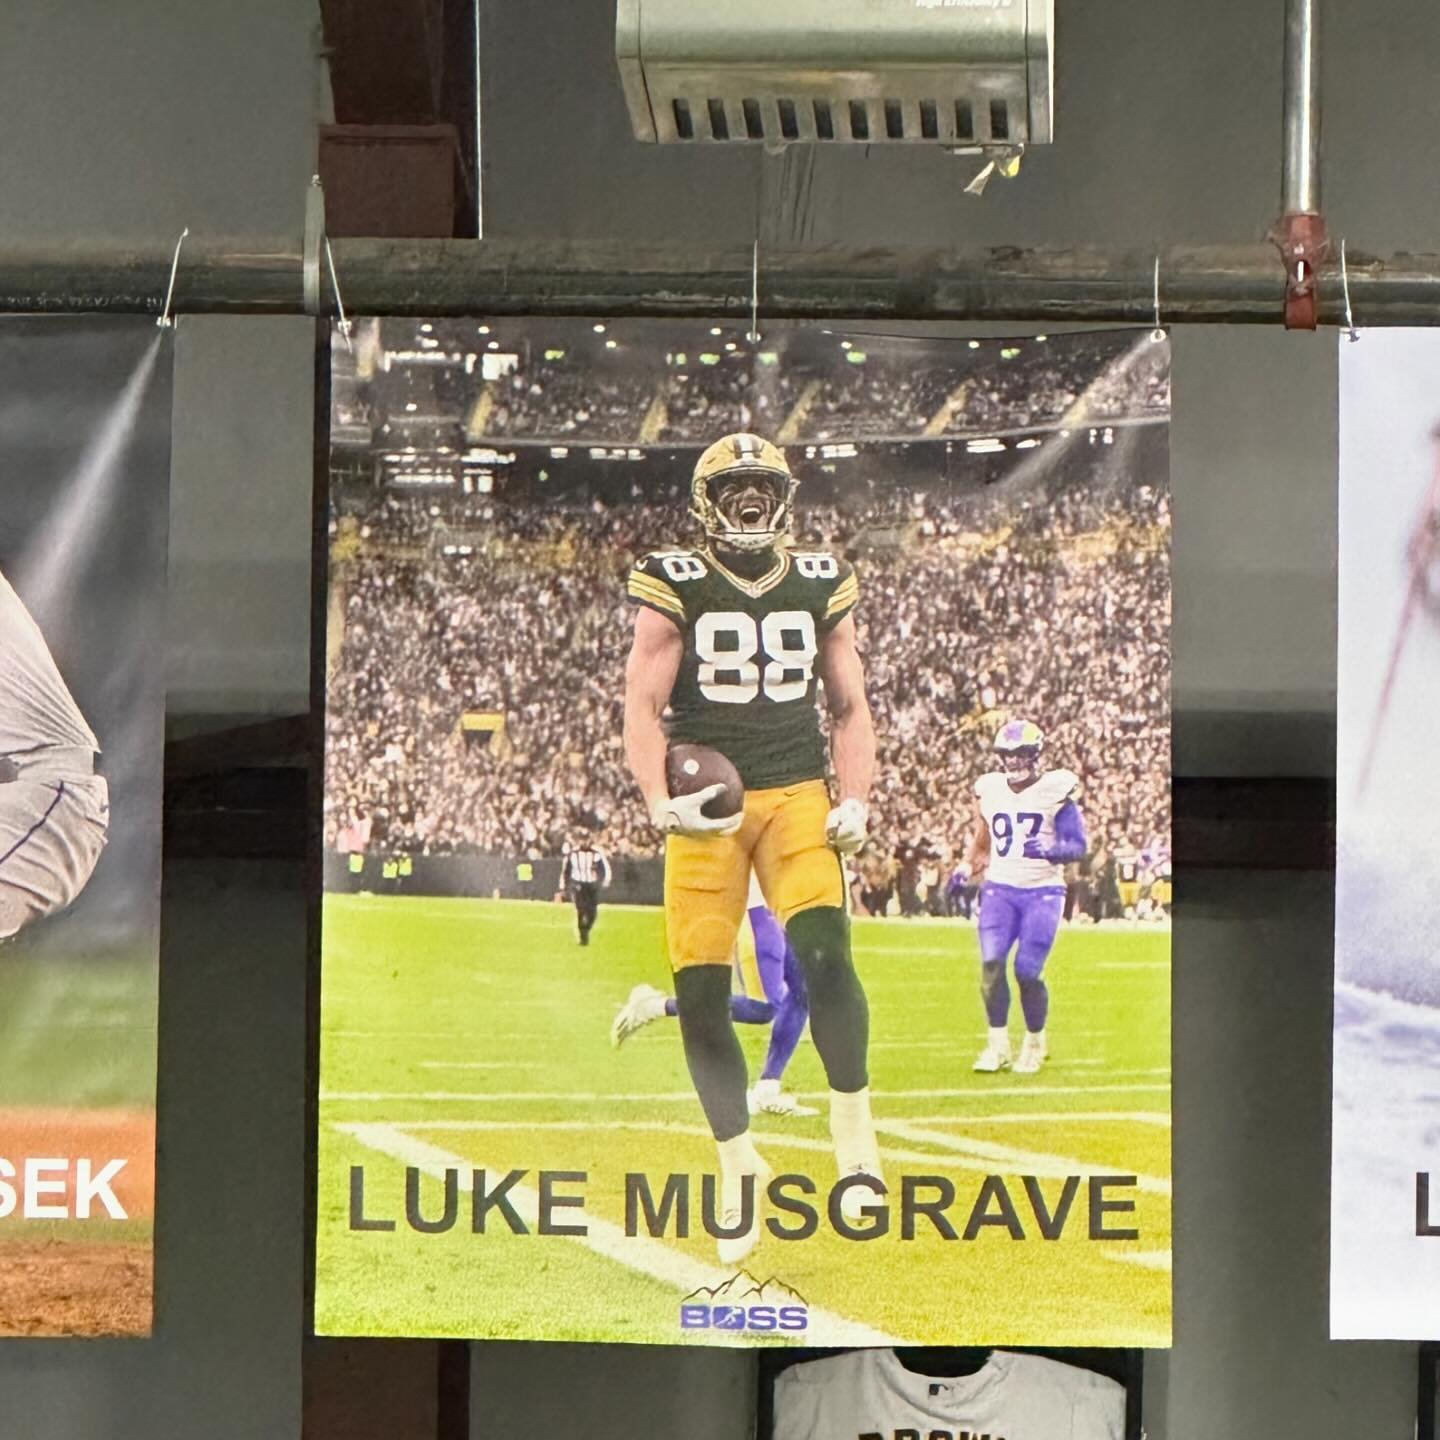 I told @lukemusgrave_ when he first started training with us back in HS that someday we&rsquo;d be hanging his poster up! Can&rsquo;t believe that day has already come! What an honor it has been to watch this kid tirelessly work his butt off to reach